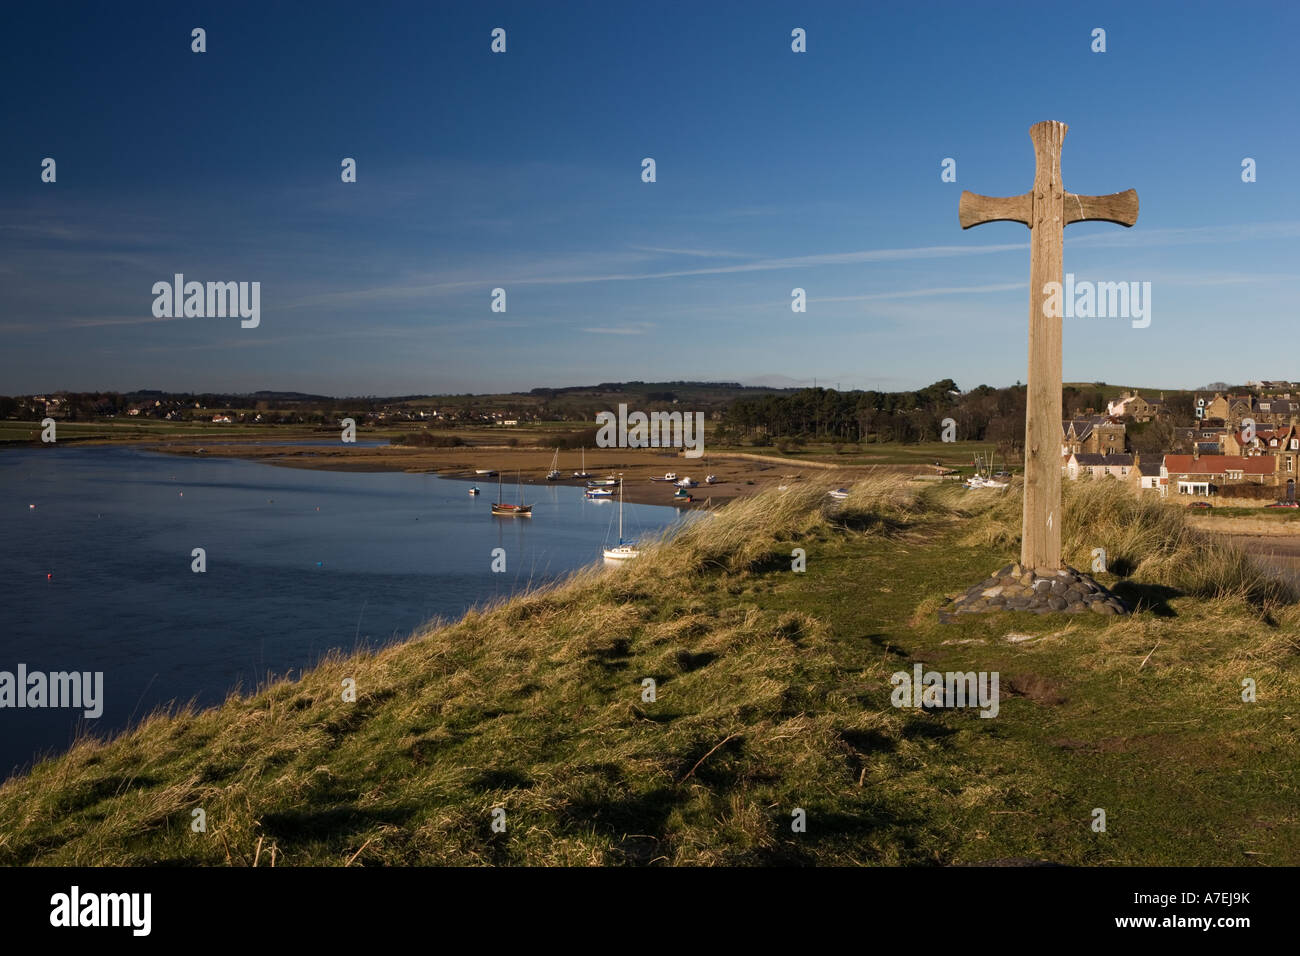 View of Alnmouth Village and Estuary from Church Hill, Northumberland, England, UK Stock Photo